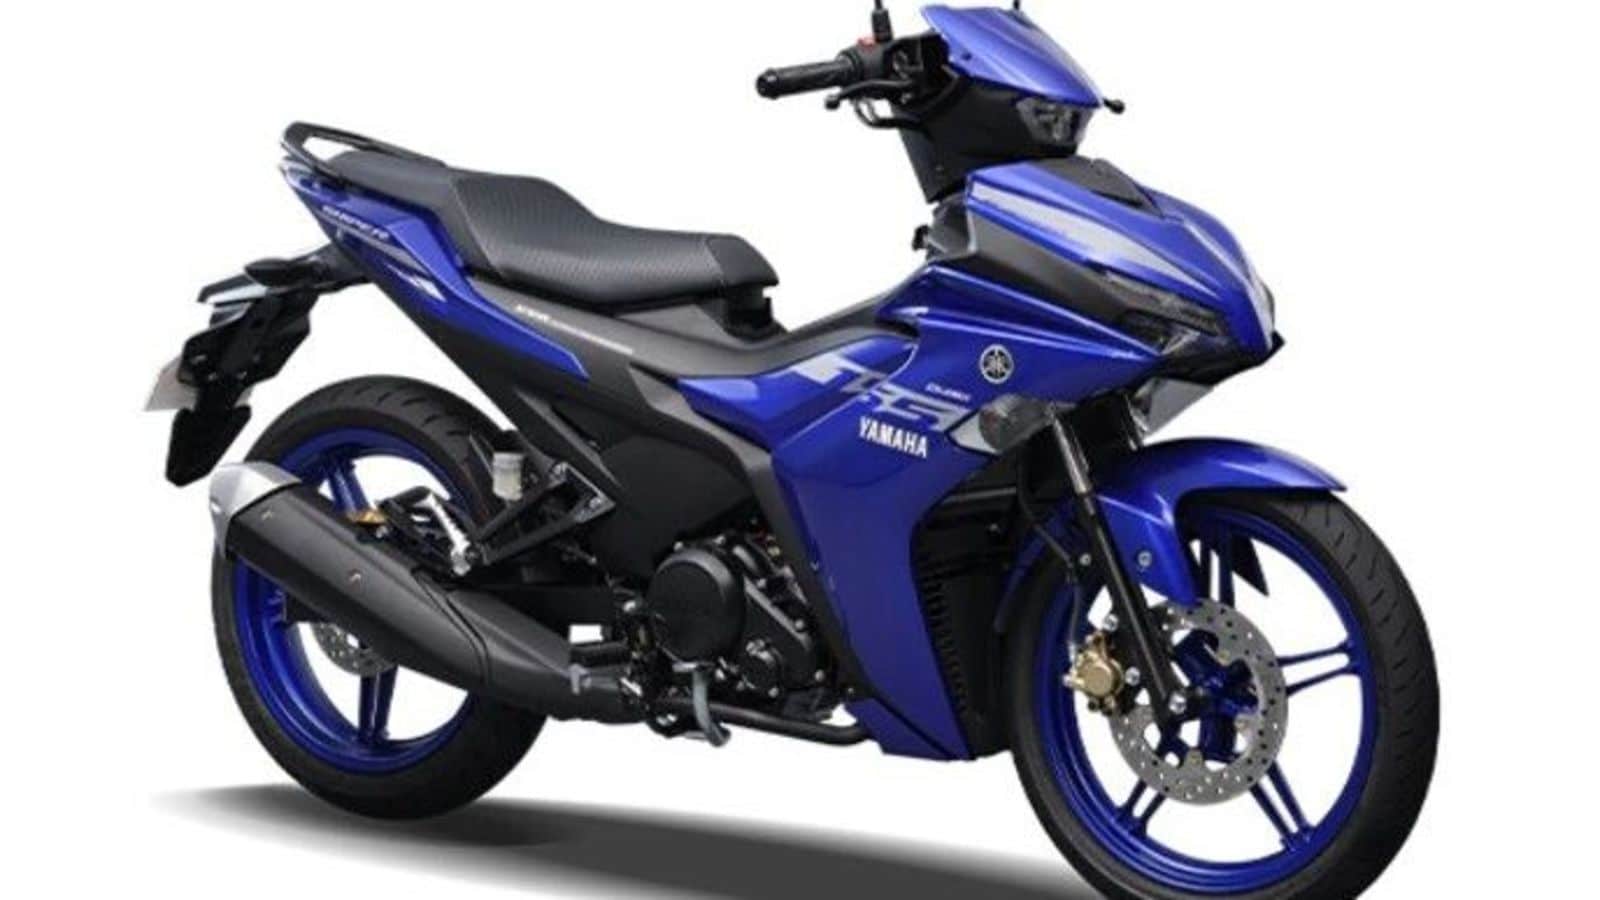 Yamaha Sniper 155 Moto Scooter Launched: All You Need To Know